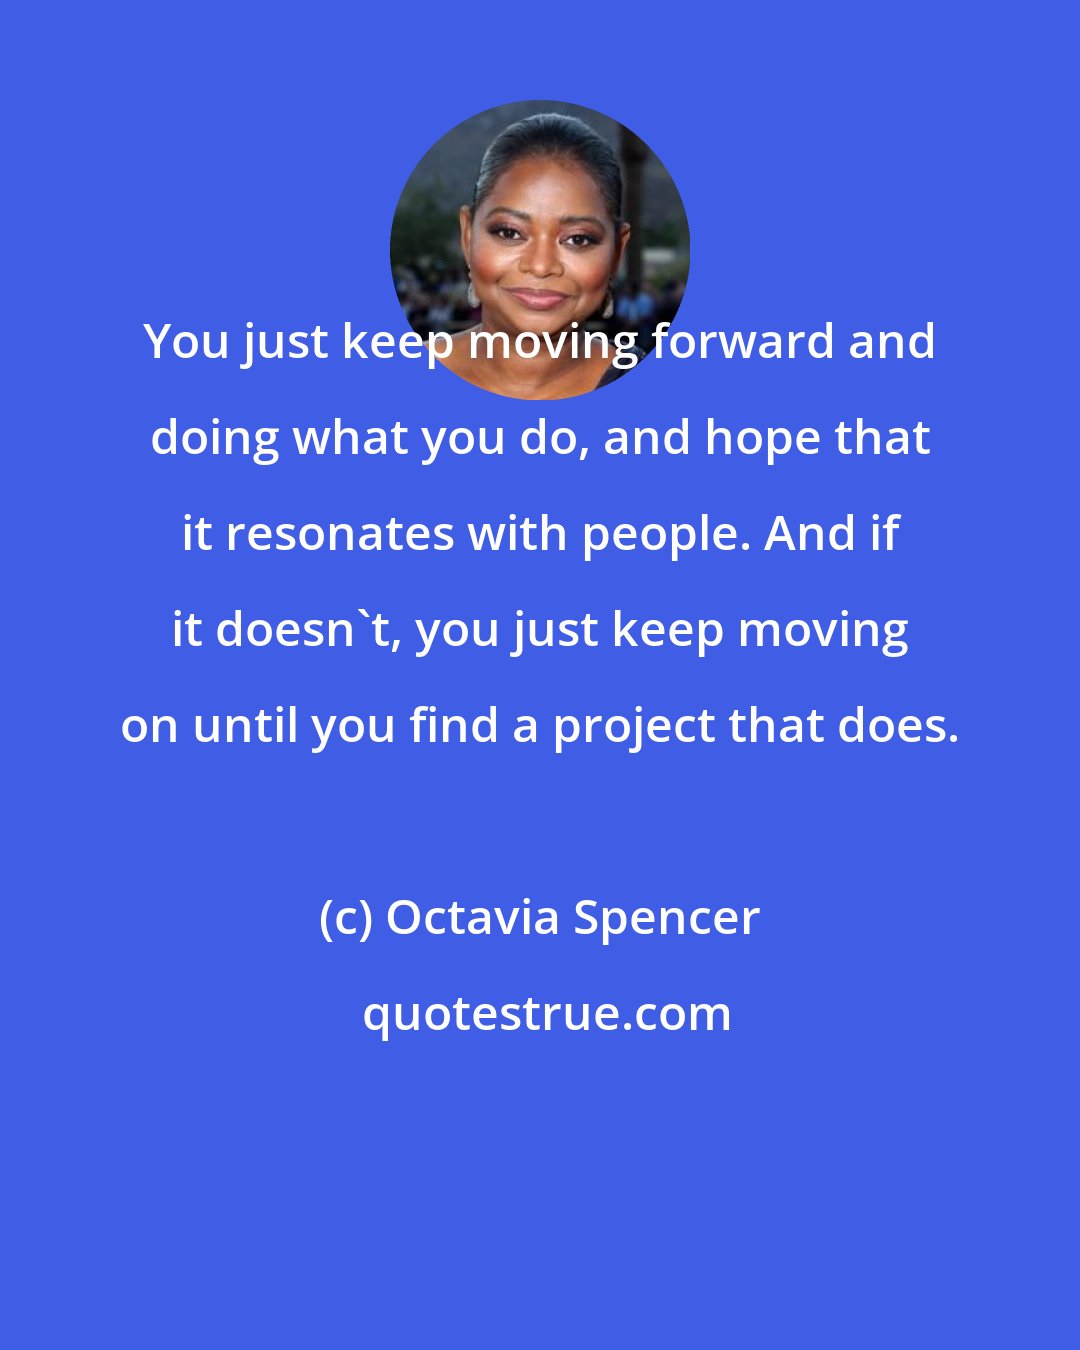 Octavia Spencer: You just keep moving forward and doing what you do, and hope that it resonates with people. And if it doesn't, you just keep moving on until you find a project that does.